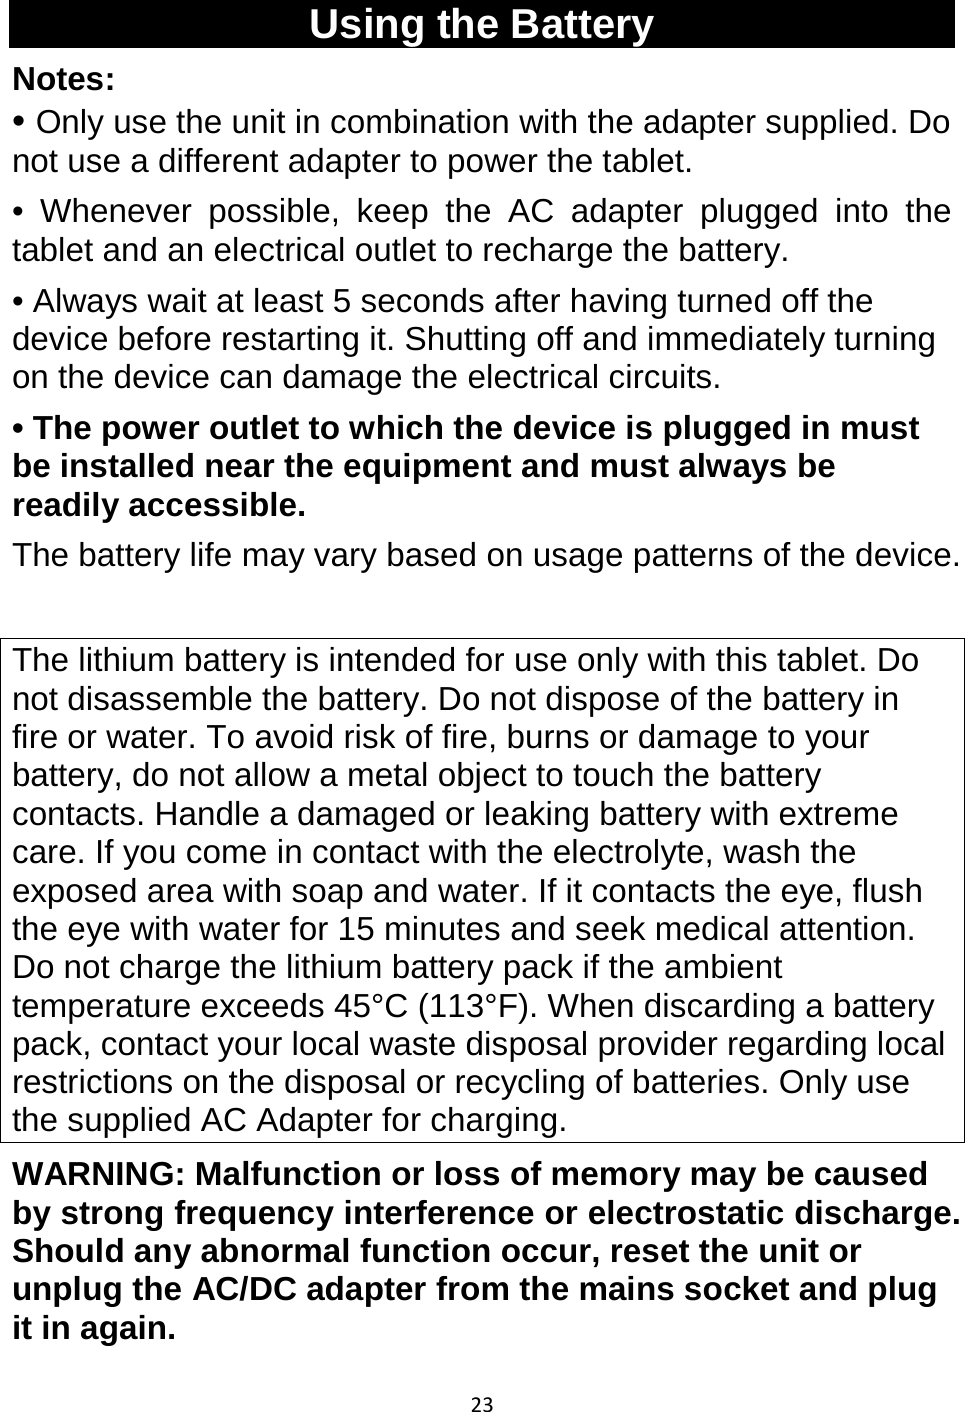 23   Using the Battery Notes:  • Only use the unit in combination with the adapter supplied. Do not use a different adapter to power the tablet. • Whenever possible, keep the AC adapter plugged into the tablet and an electrical outlet to recharge the battery. • Always wait at least 5 seconds after having turned off the device before restarting it. Shutting off and immediately turning on the device can damage the electrical circuits. • The power outlet to which the device is plugged in must be installed near the equipment and must always be readily accessible. The battery life may vary based on usage patterns of the device.   The lithium battery is intended for use only with this tablet. Do not disassemble the battery. Do not dispose of the battery in fire or water. To avoid risk of fire, burns or damage to your battery, do not allow a metal object to touch the battery contacts. Handle a damaged or leaking battery with extreme care. If you come in contact with the electrolyte, wash the exposed area with soap and water. If it contacts the eye, flush the eye with water for 15 minutes and seek medical attention. Do not charge the lithium battery pack if the ambient temperature exceeds 45°C (113°F). When discarding a battery pack, contact your local waste disposal provider regarding local restrictions on the disposal or recycling of batteries. Only use the supplied AC Adapter for charging. WARNING: Malfunction or loss of memory may be caused by strong frequency interference or electrostatic discharge. Should any abnormal function occur, reset the unit or unplug the AC/DC adapter from the mains socket and plug it in again.